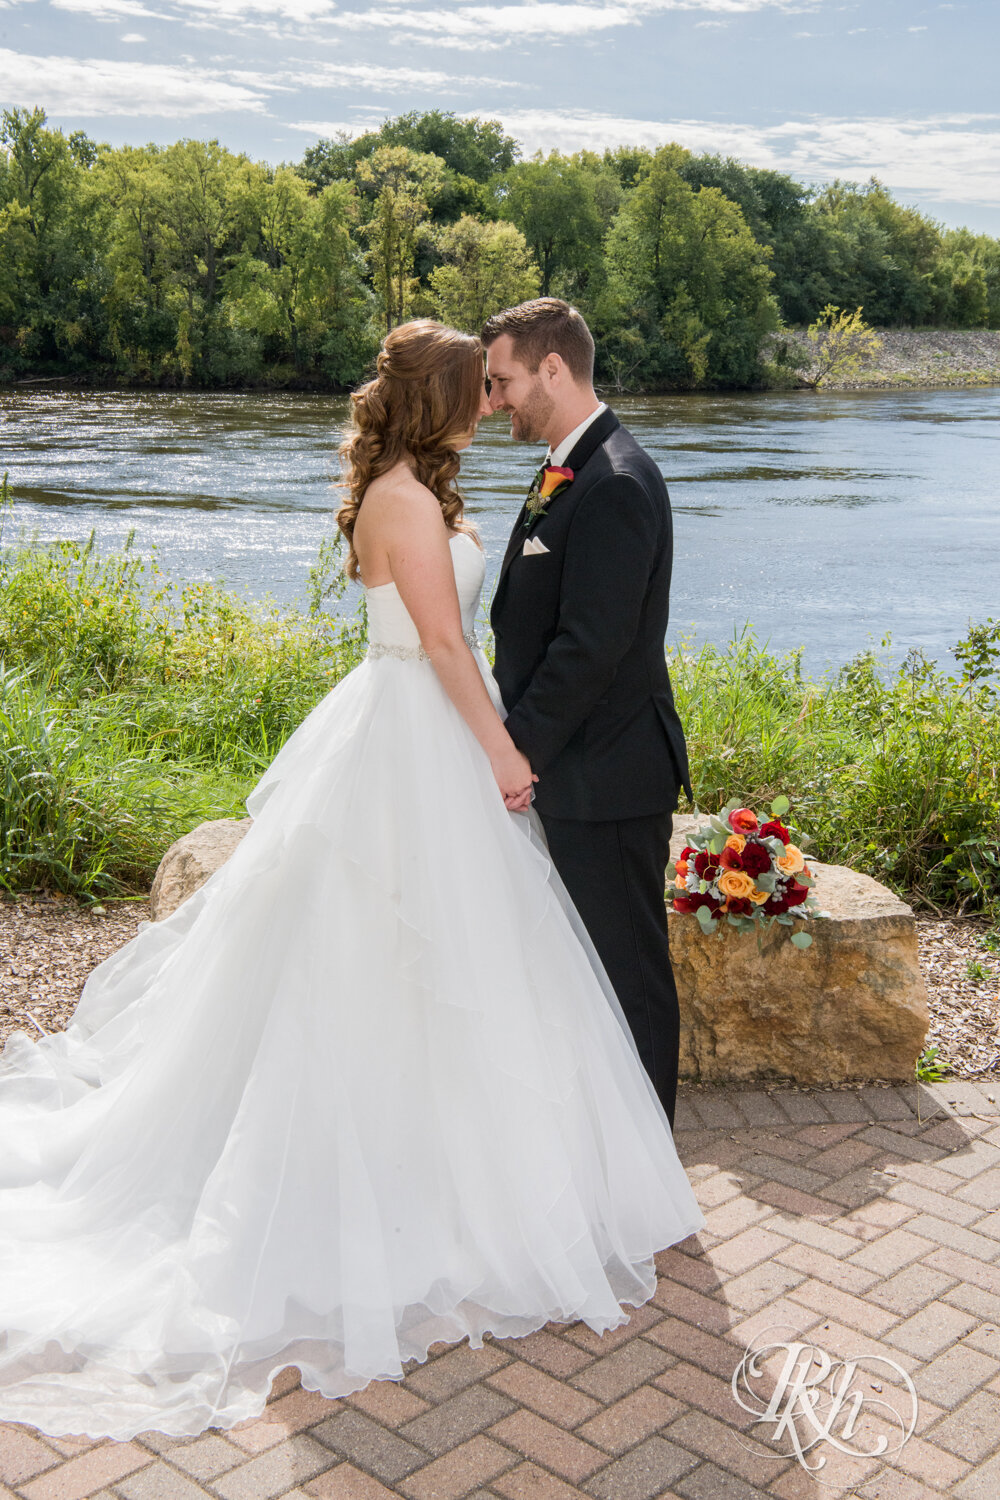 Bride and groom smiling in front of lake in Otsego, Minnesota on sunny wedding day.